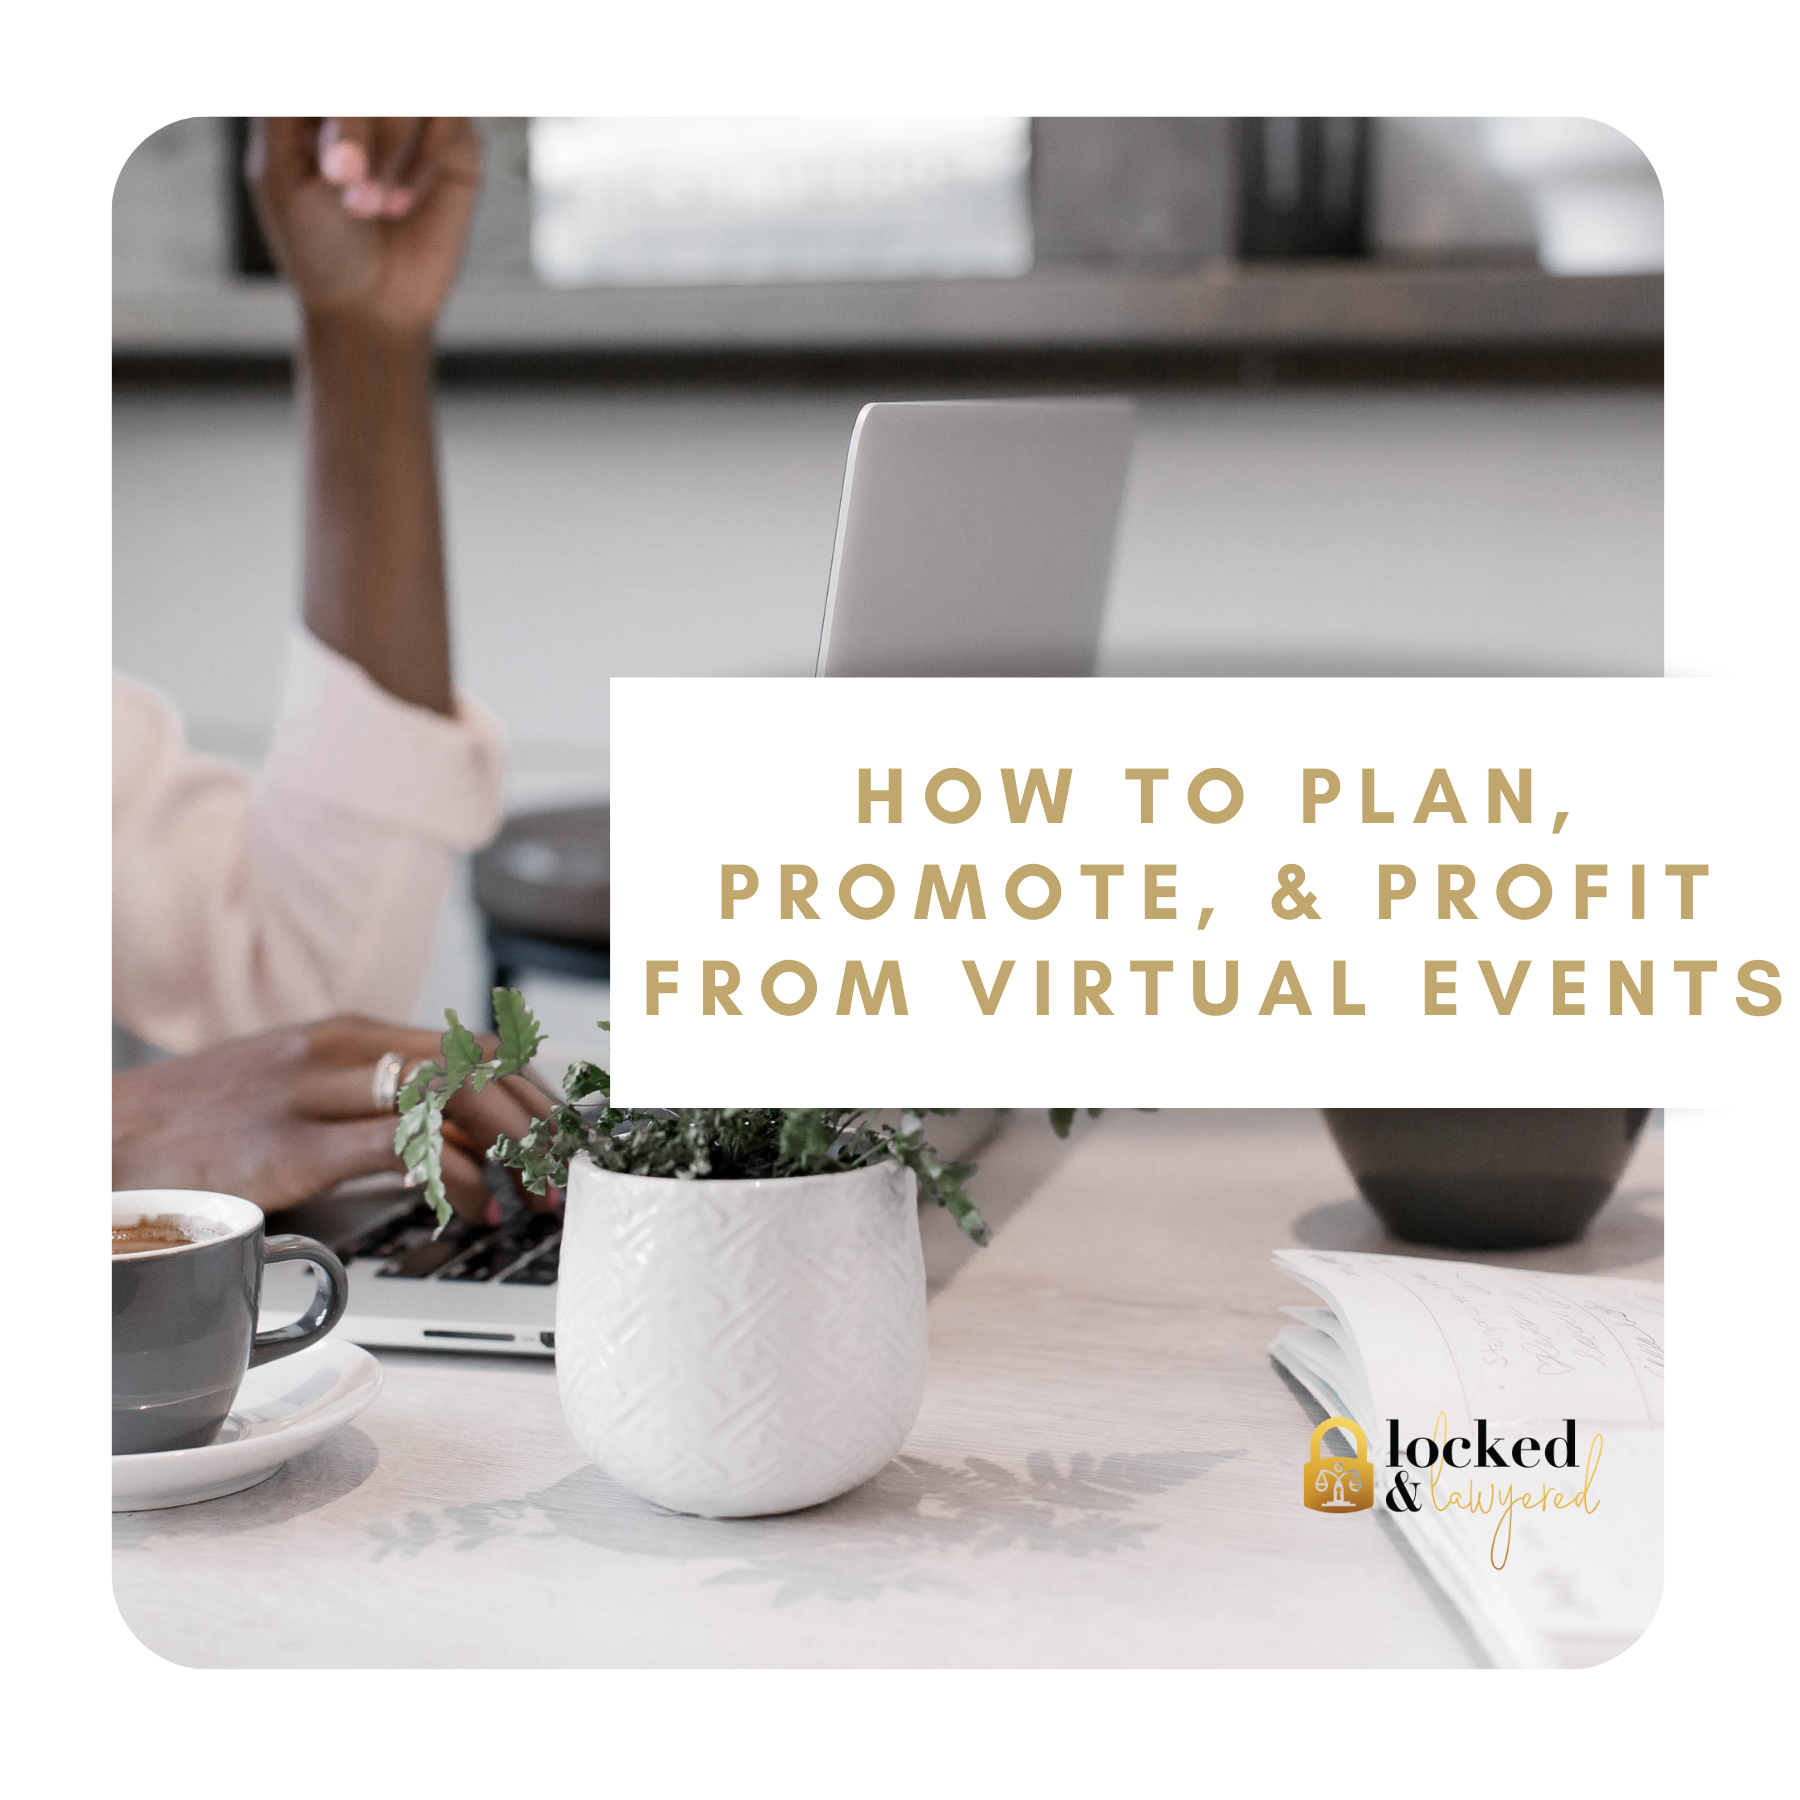 How to Plan, Promote, & Profit from Virtual Events